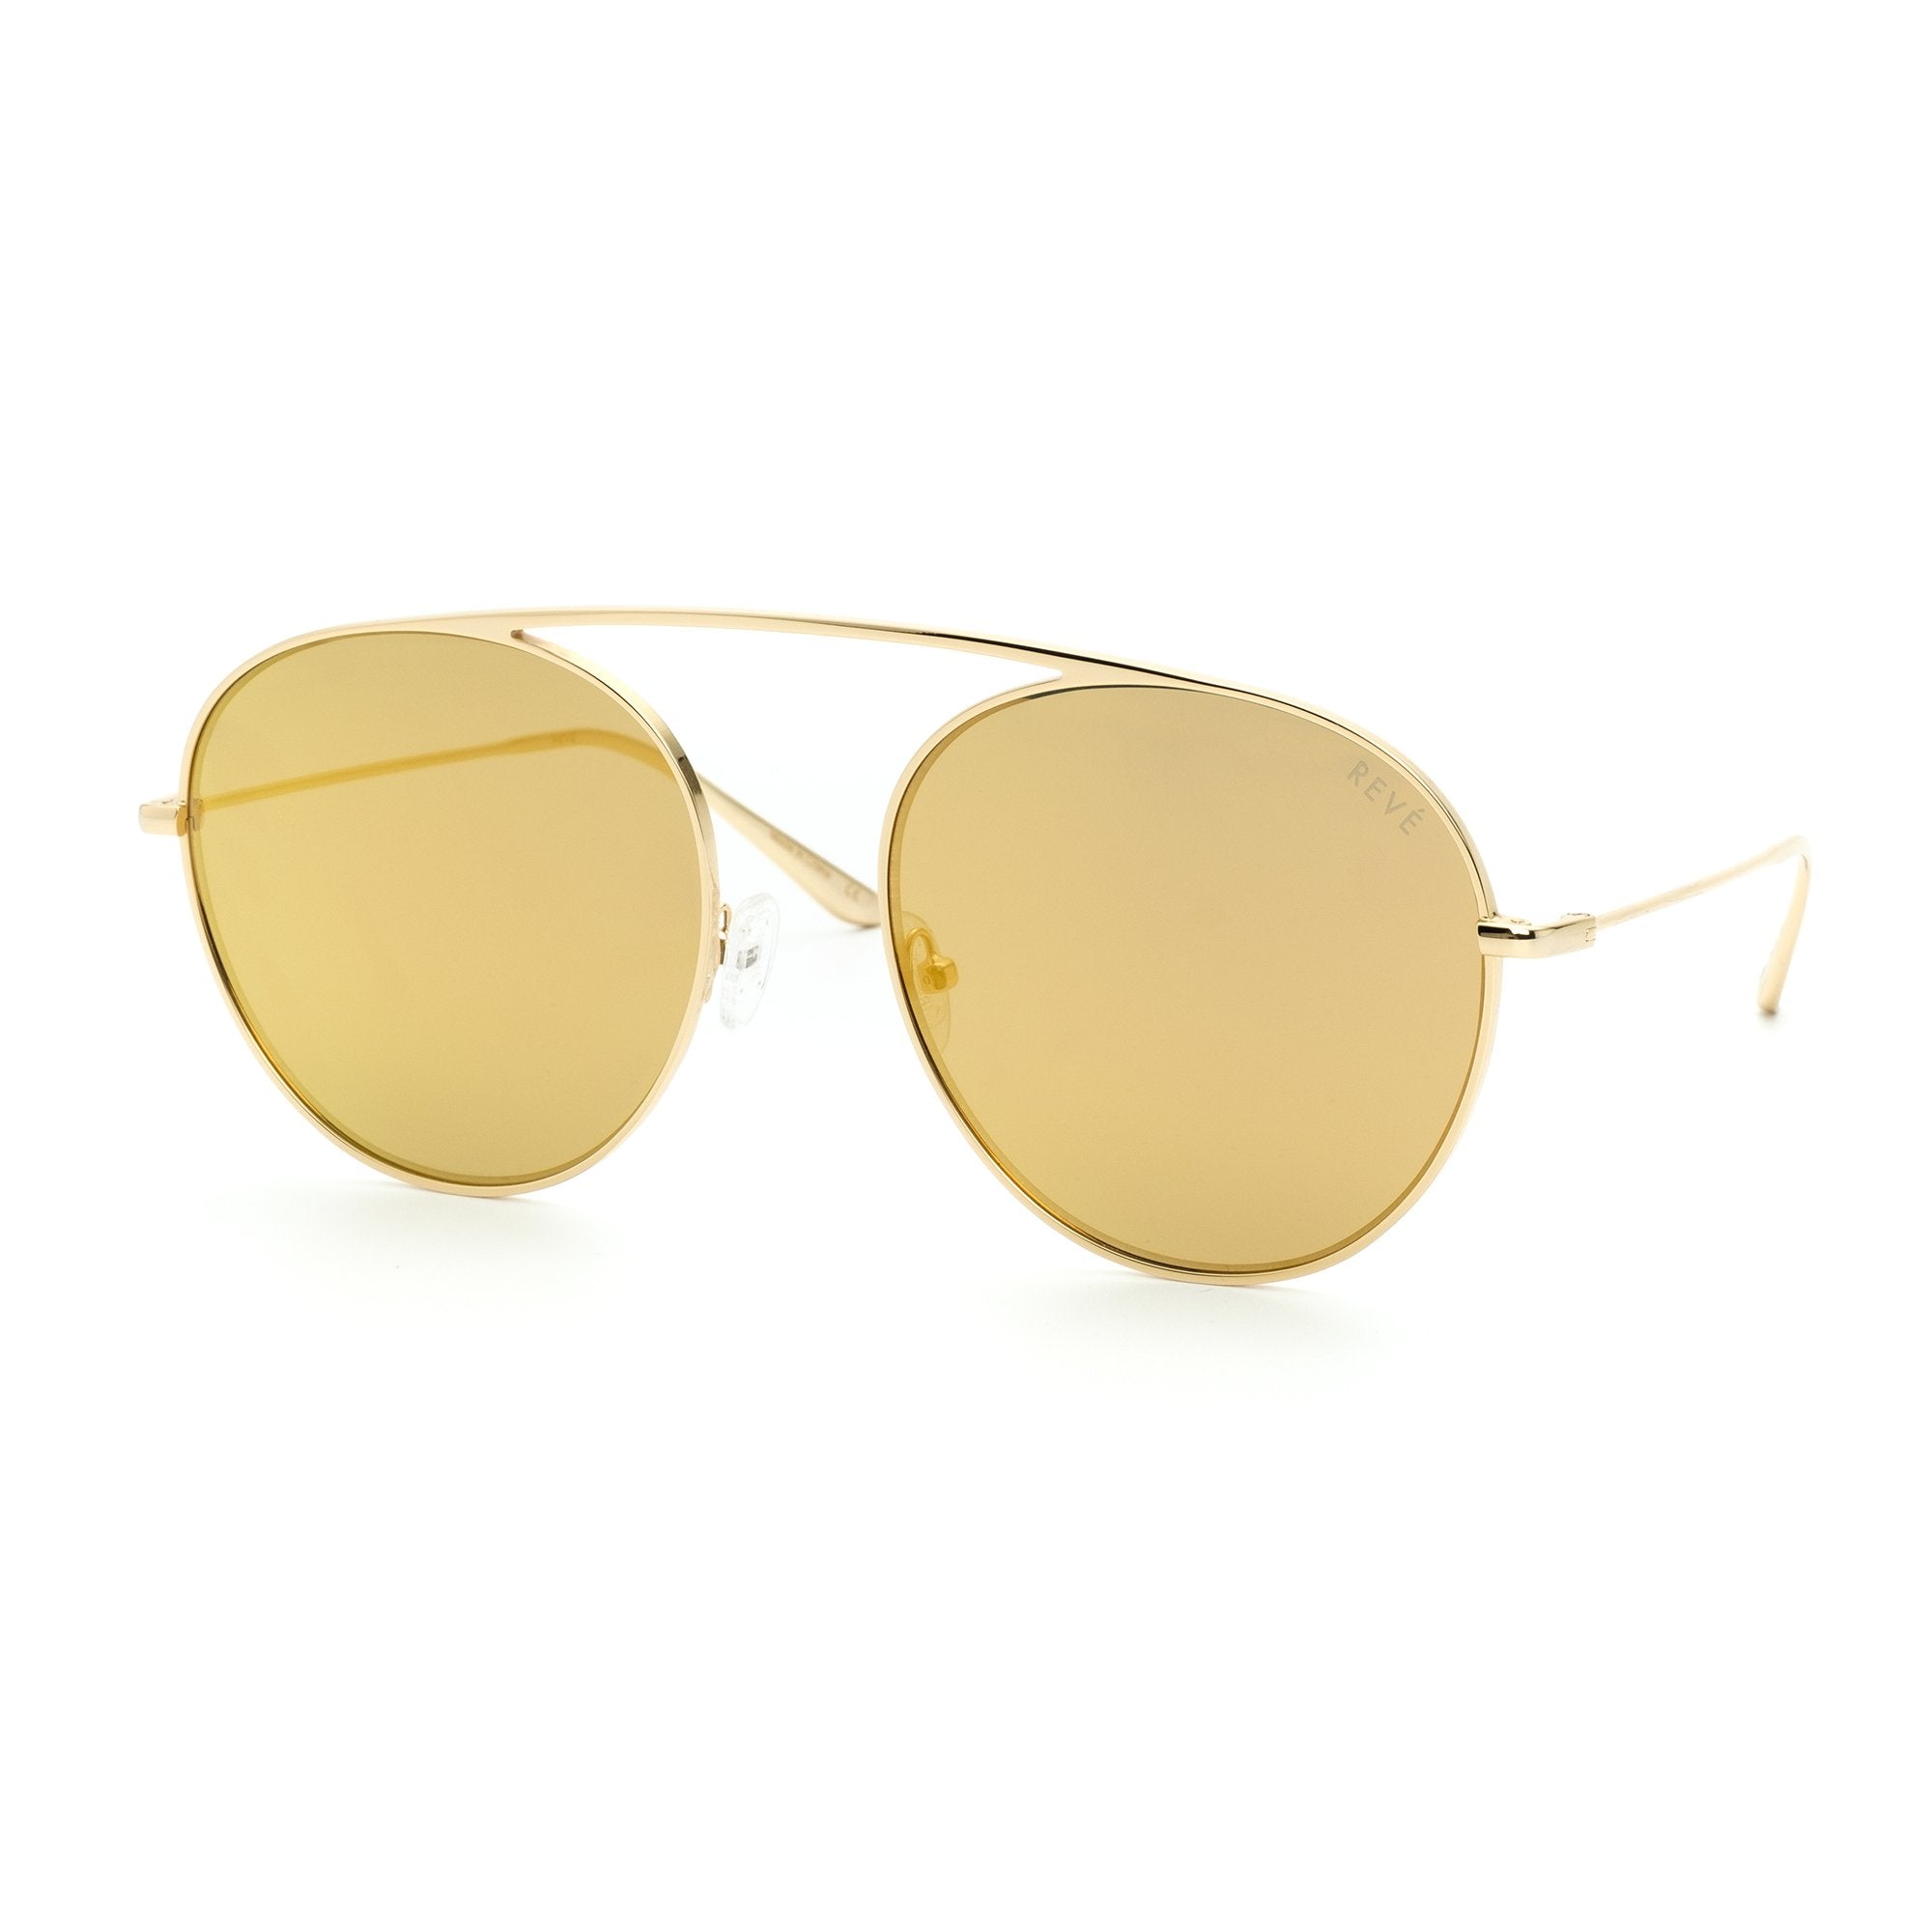 REVE by RENE 4am sunglasses in gold